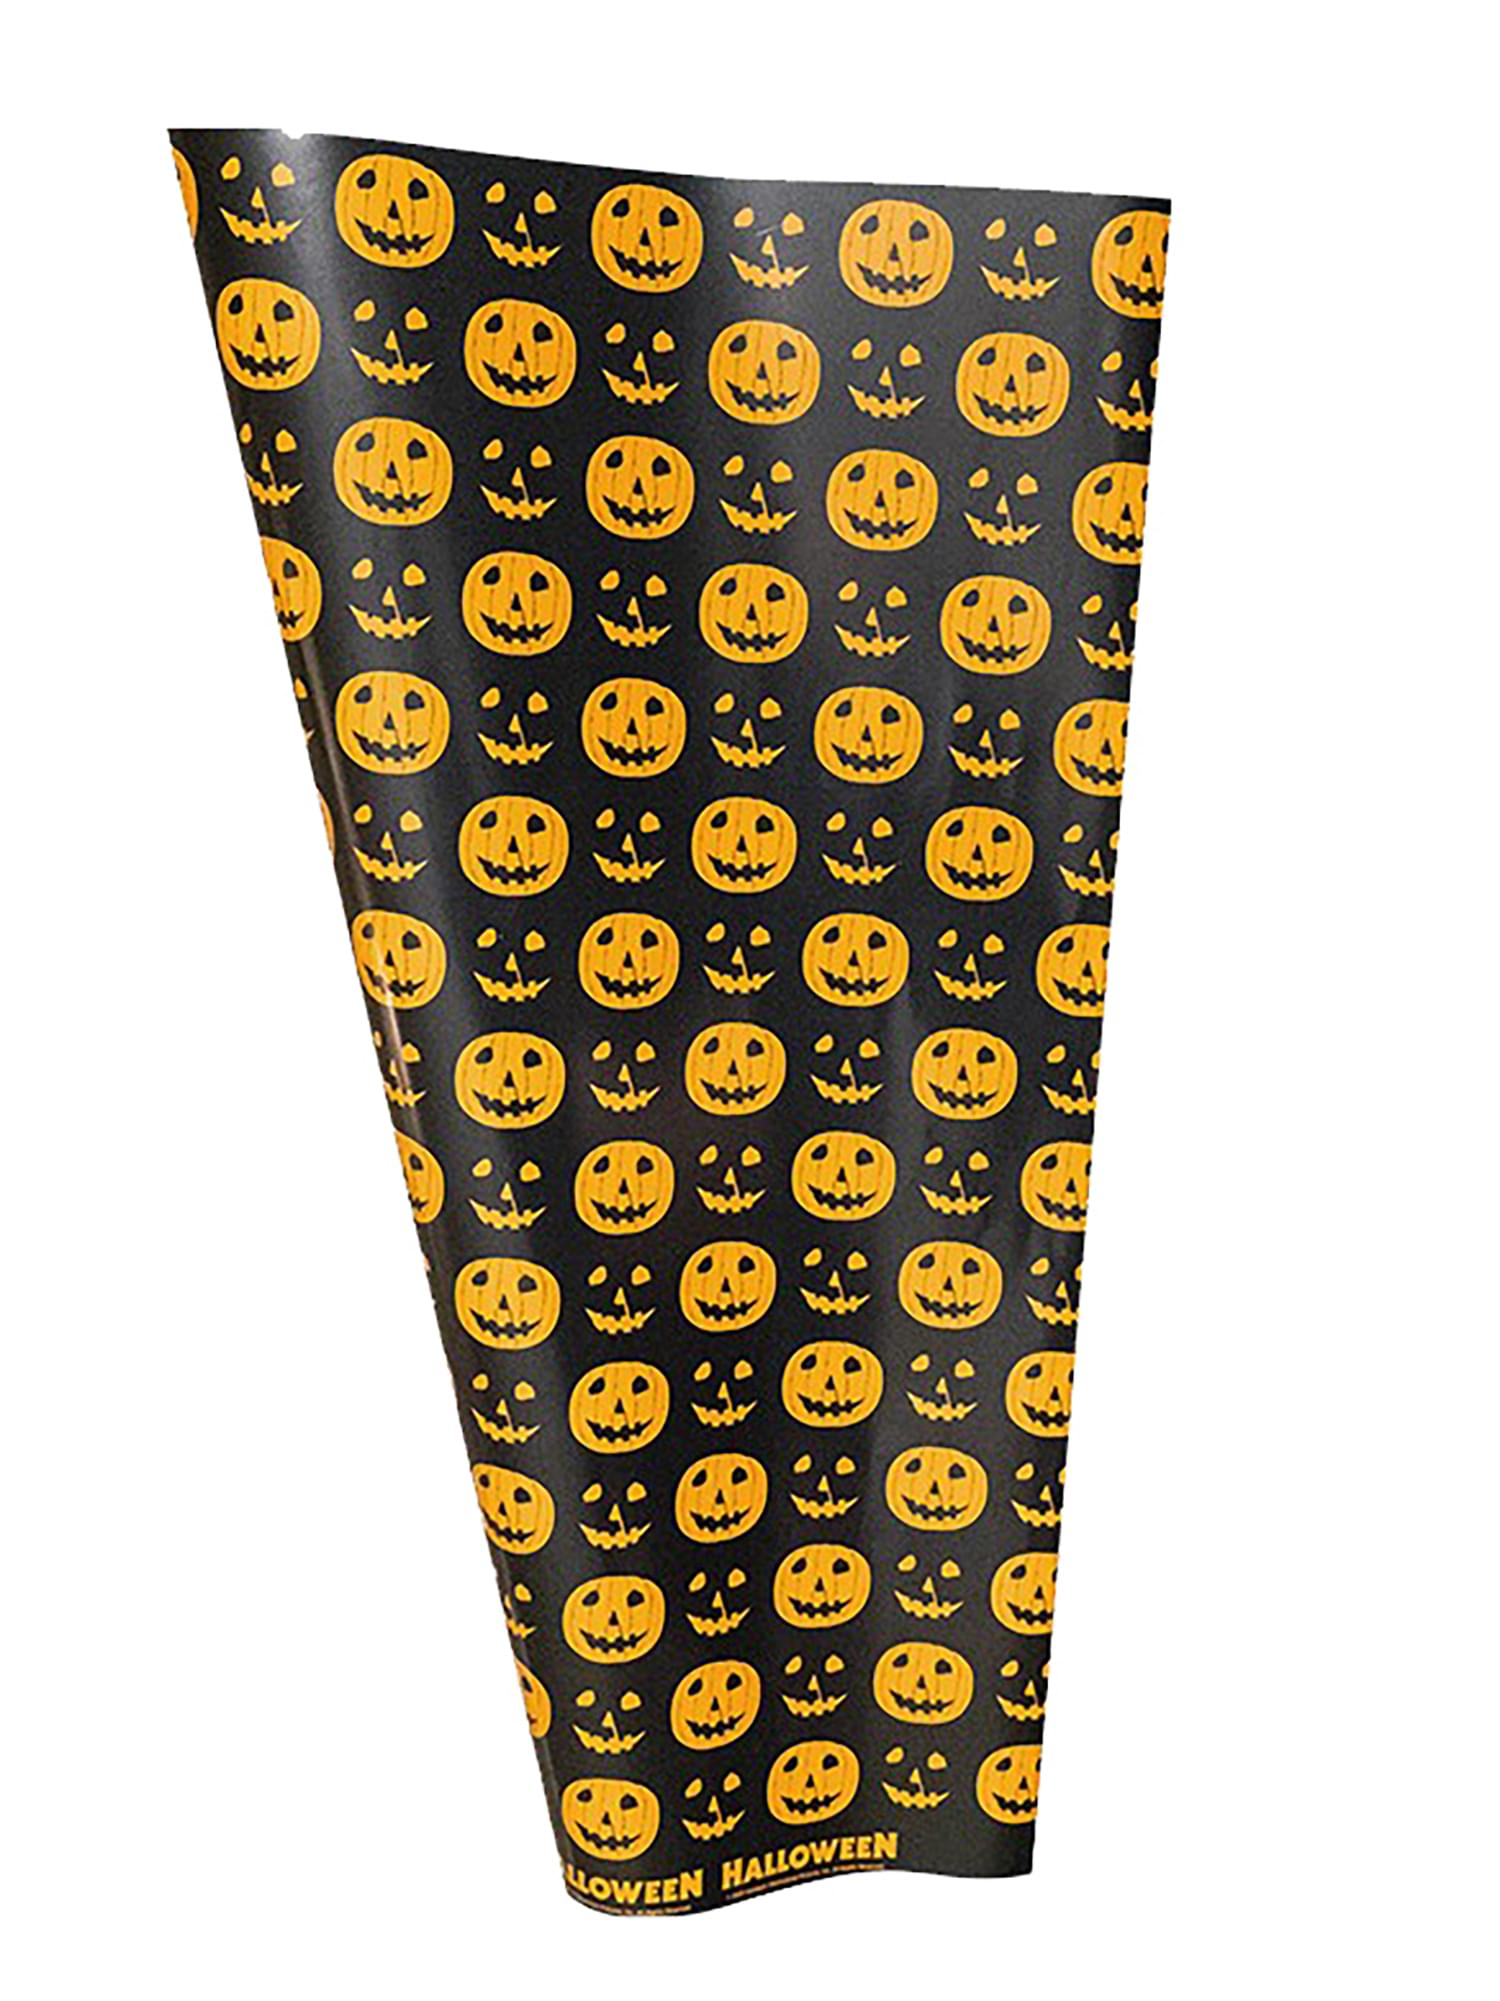 Halloween 1978 Pumpkin Premium Wrapping Paper | 30 x 96 Inches